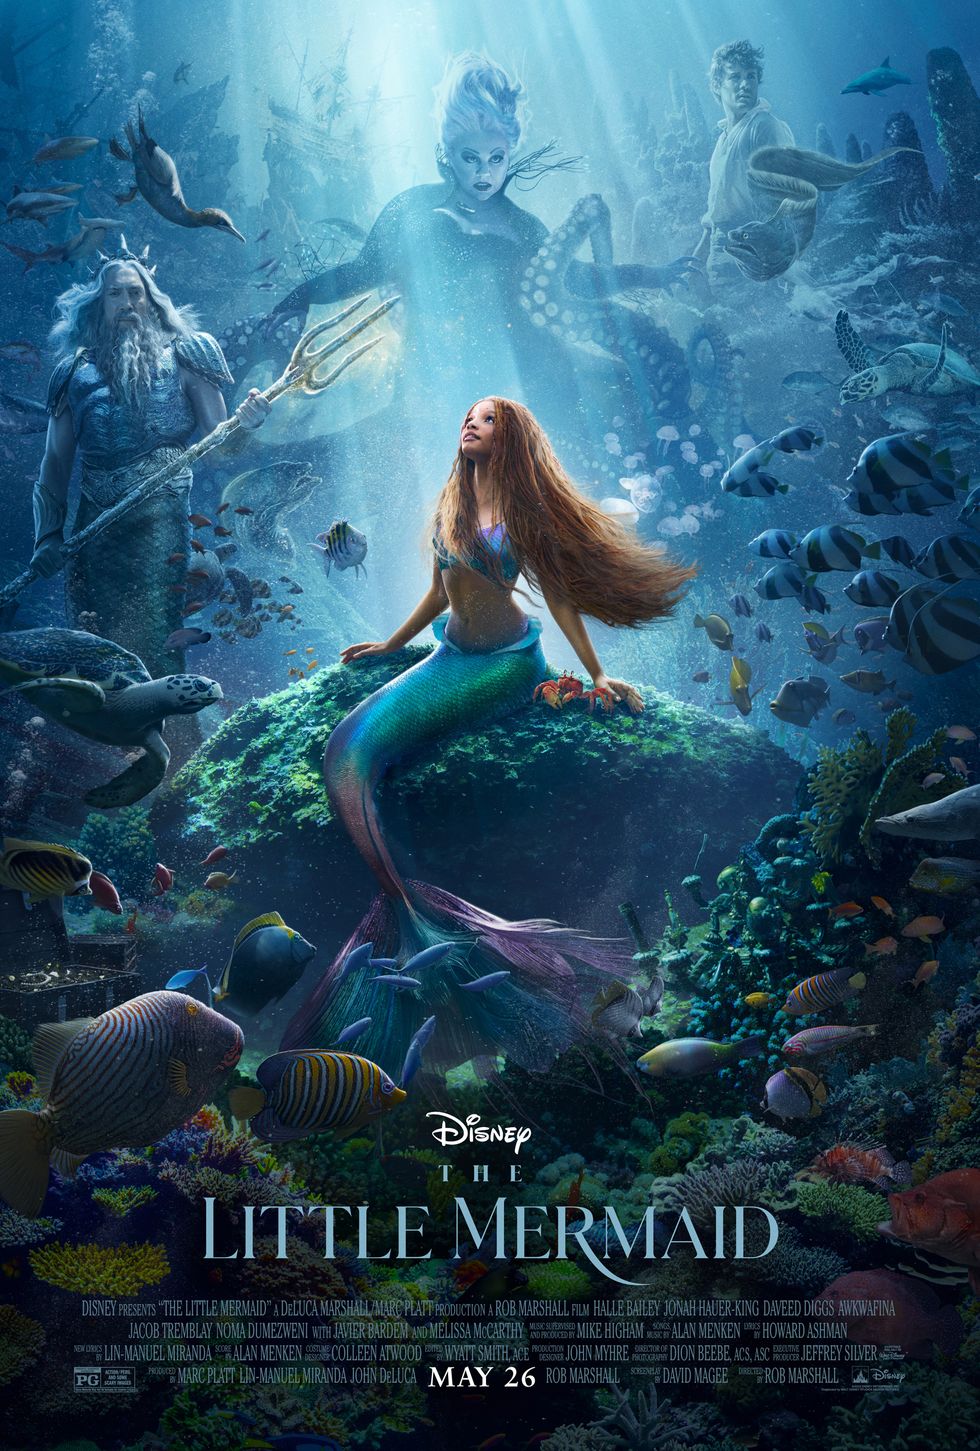 Disney: All the new live-action remakes